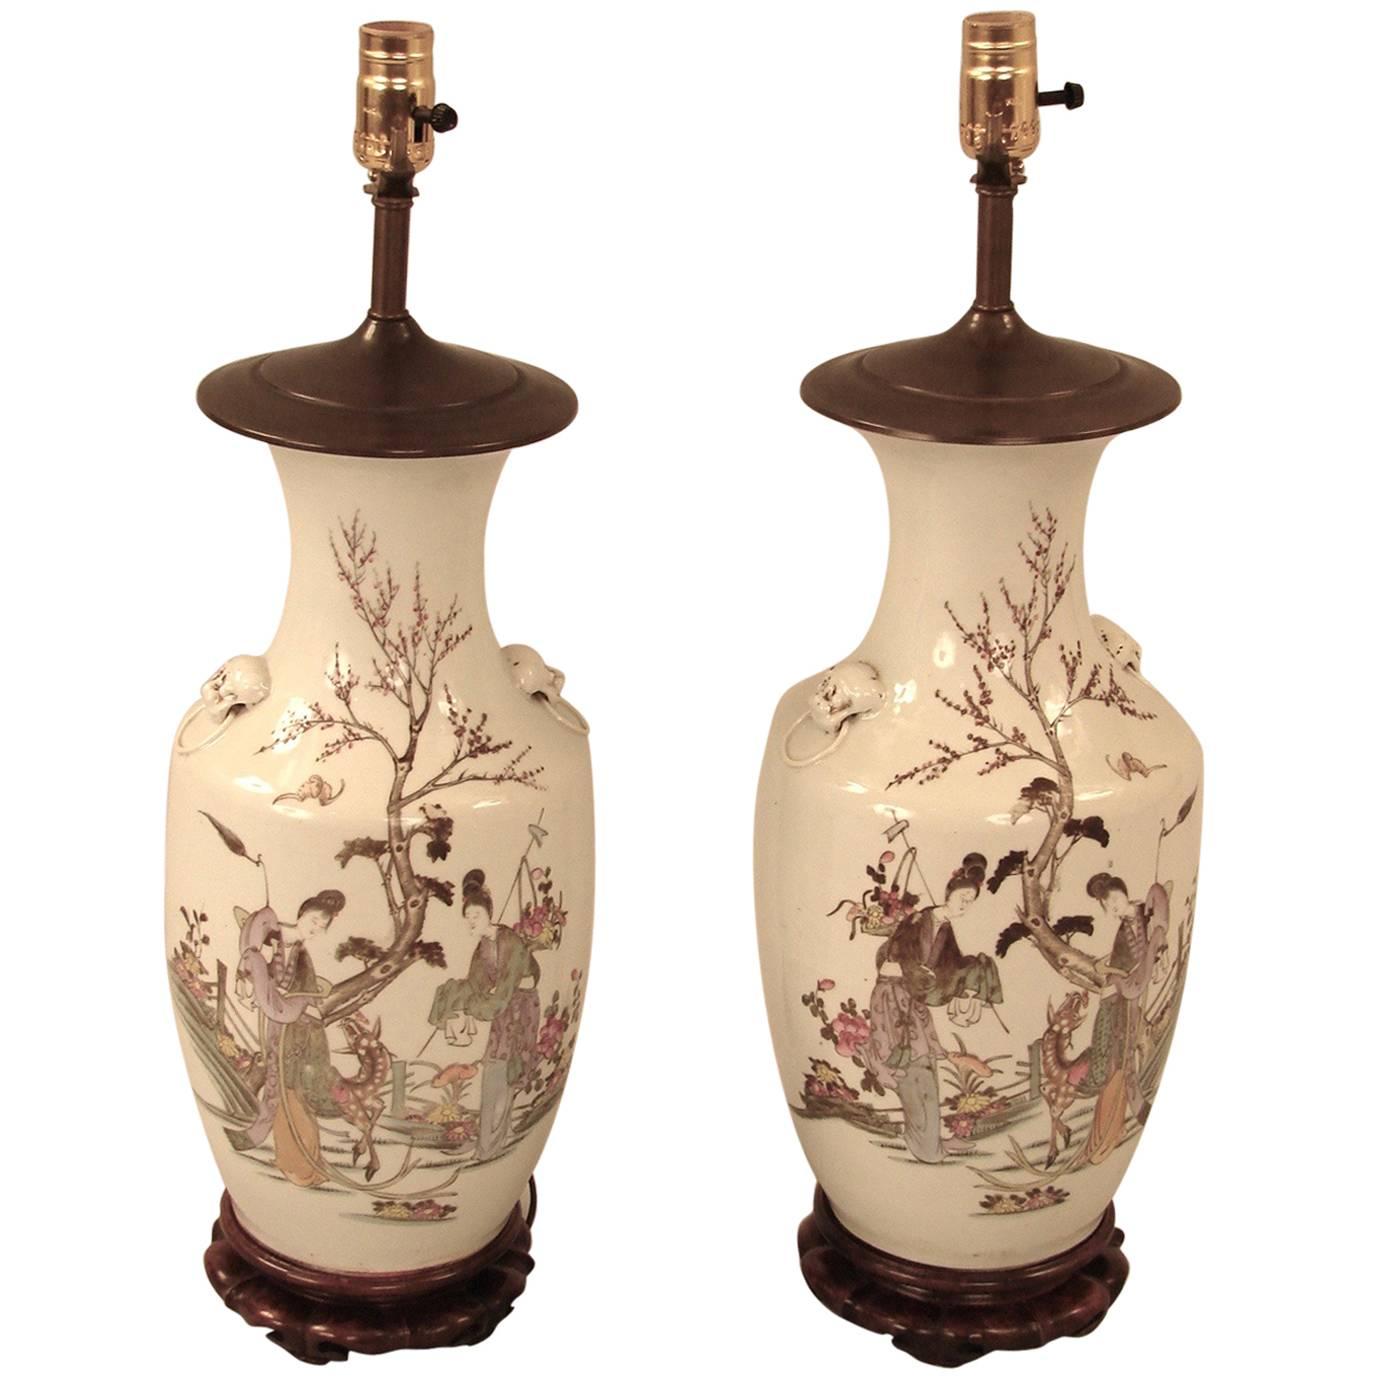 Pair of Nineteenth Century Porcelain Chinese Vases Now as Lamps